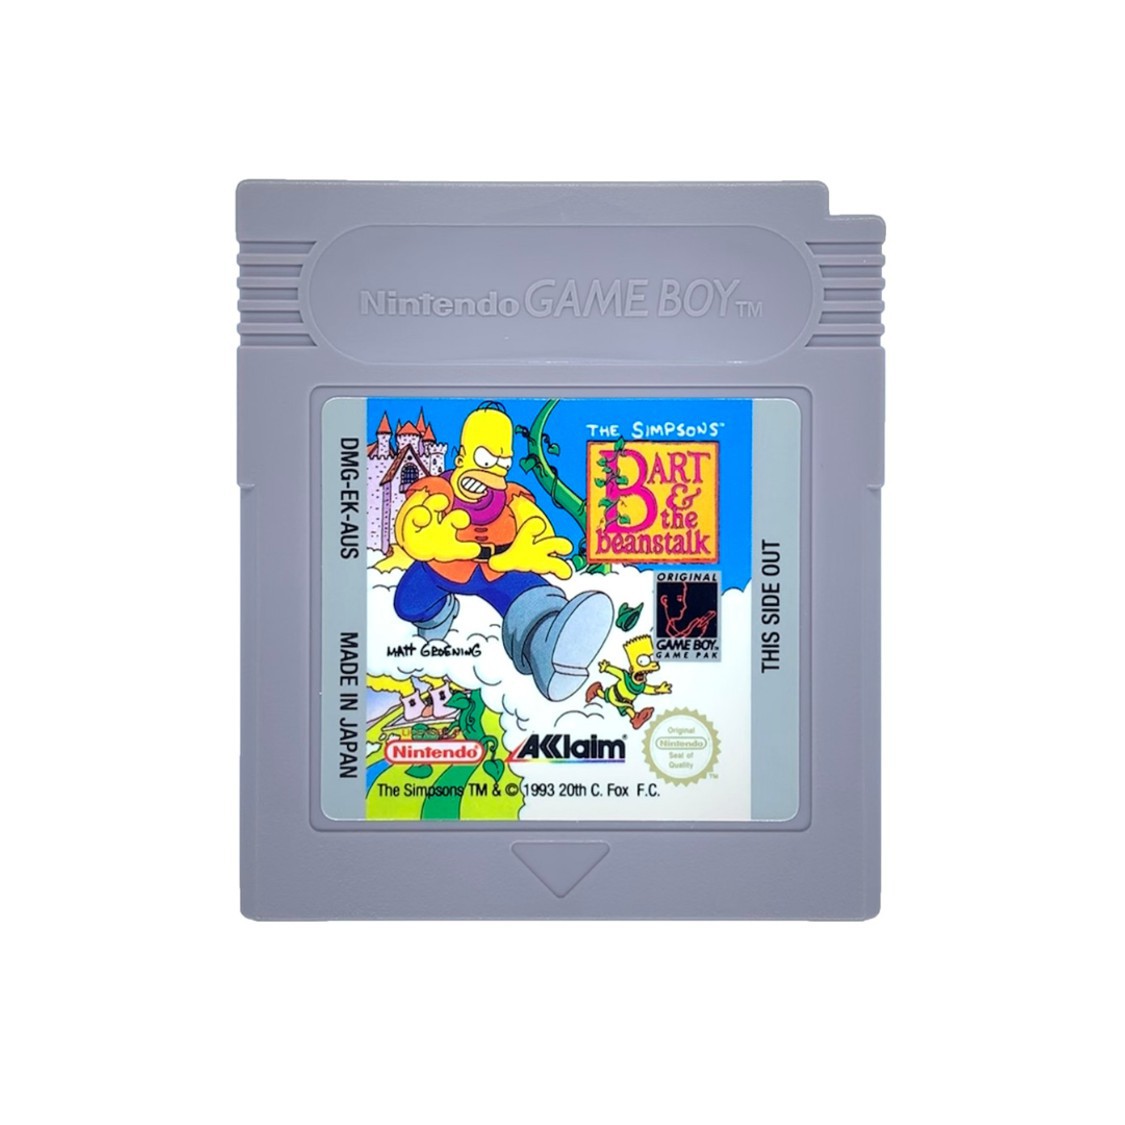 The Simpsons: Bart and the Beanstalk - Gameboy Classic Games